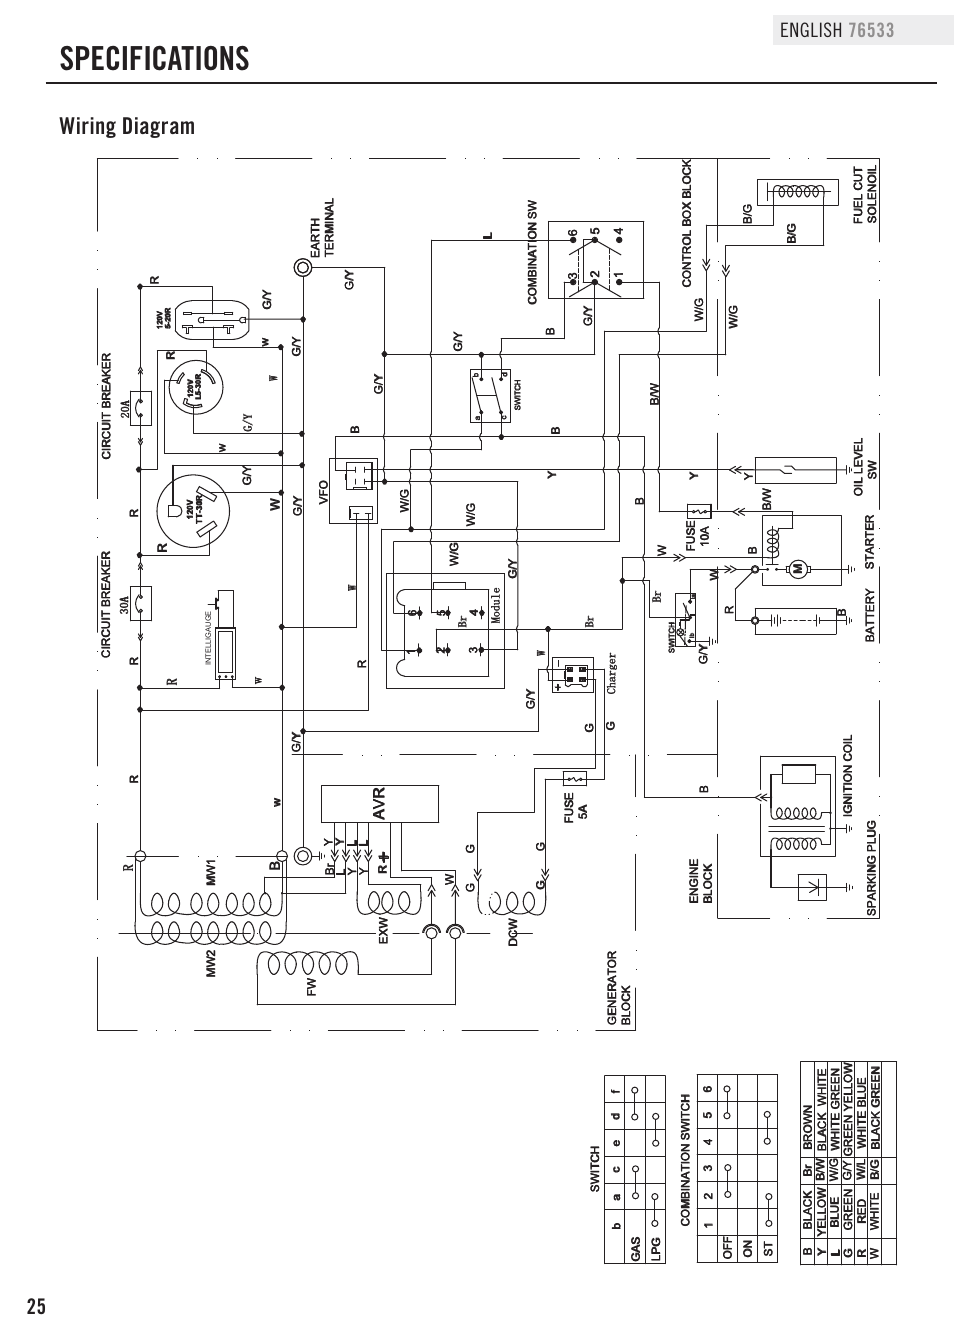 Specifications  Wiring Diagram